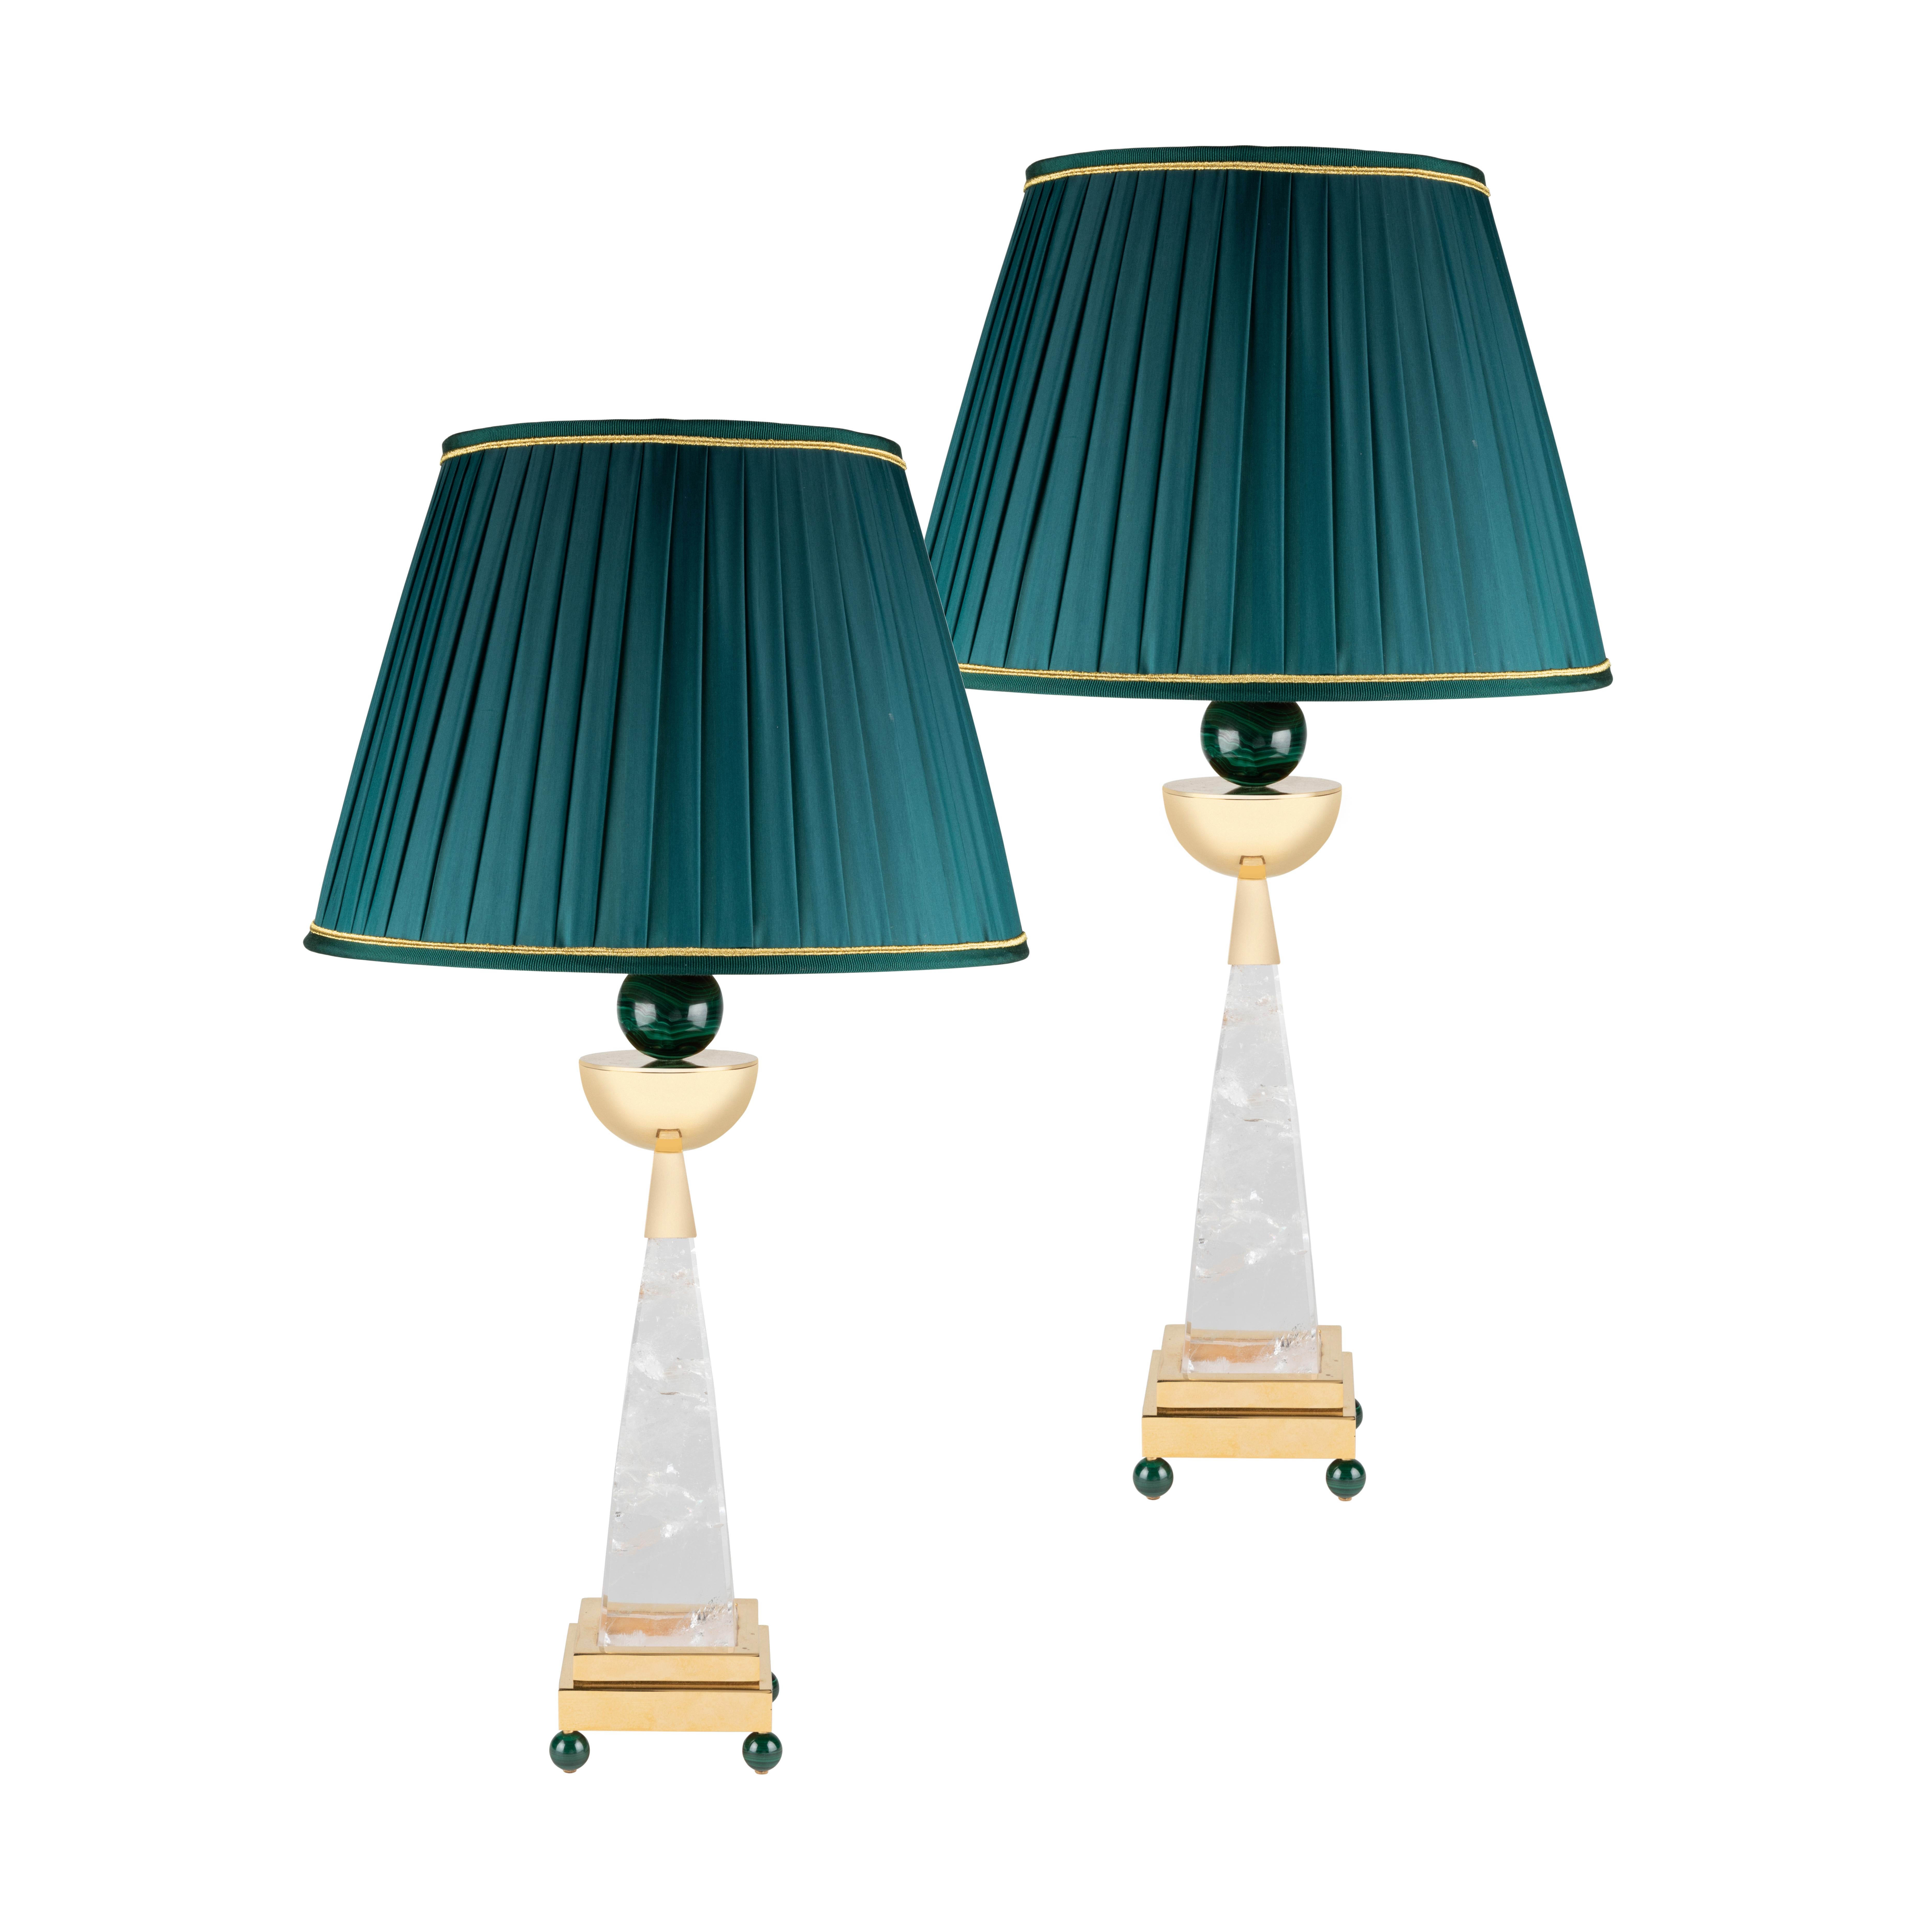 Rock crystal, 24 K gold plated brass, malachite, customized lampshades AIKO II model of lamps by Alexandre VOSSION.
Limited edition, made in PARIS.